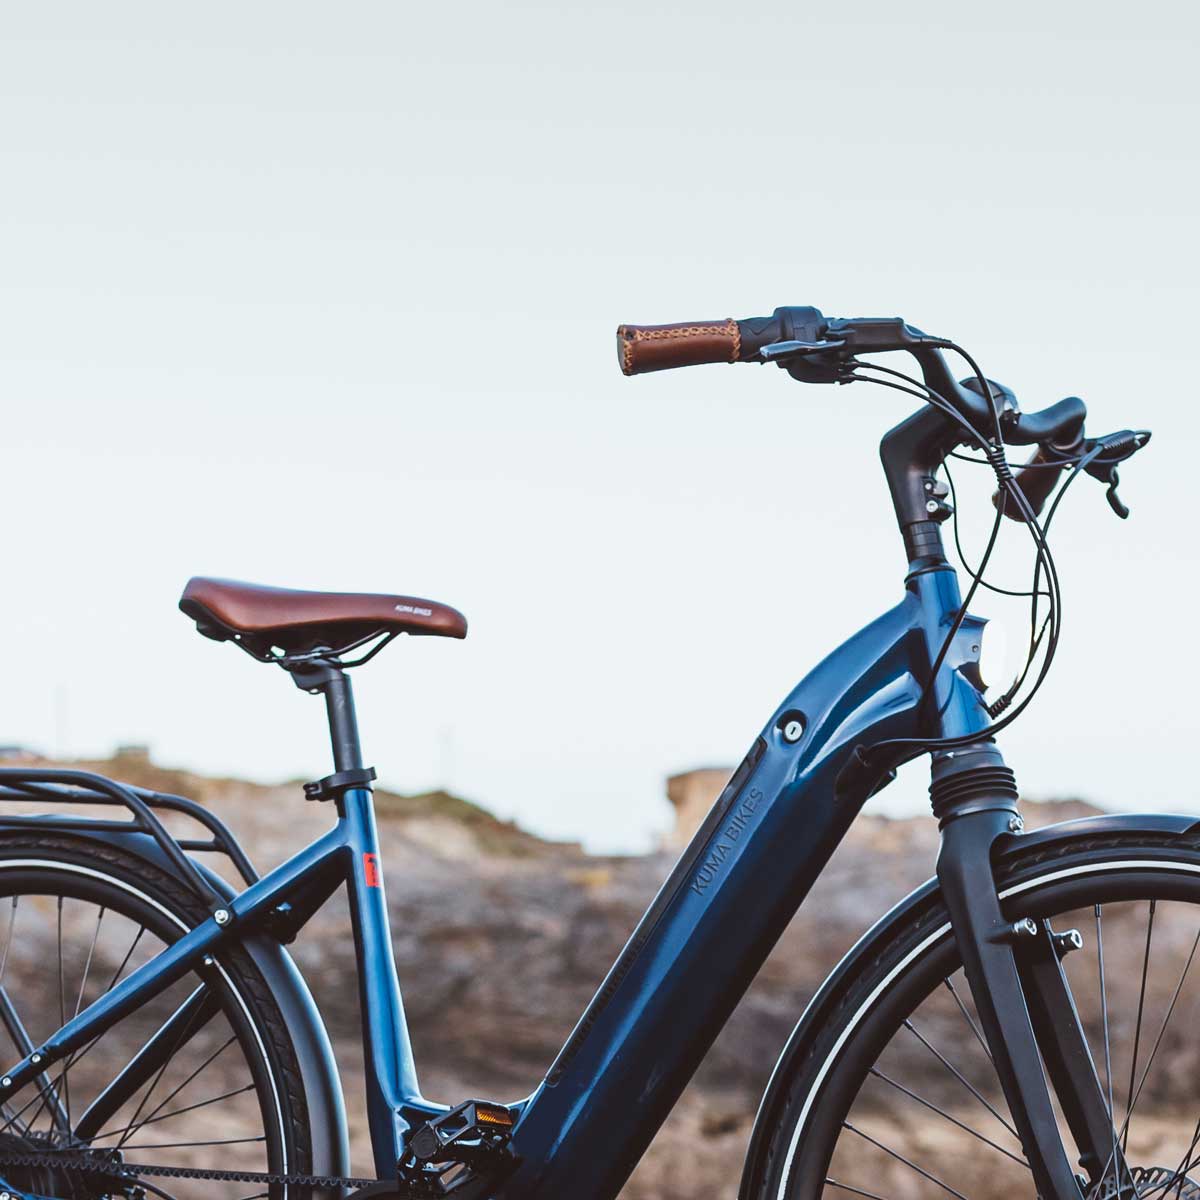 A close-up photo of the Kuma S2 electric bike displaying the Navy Metallic frame colour.